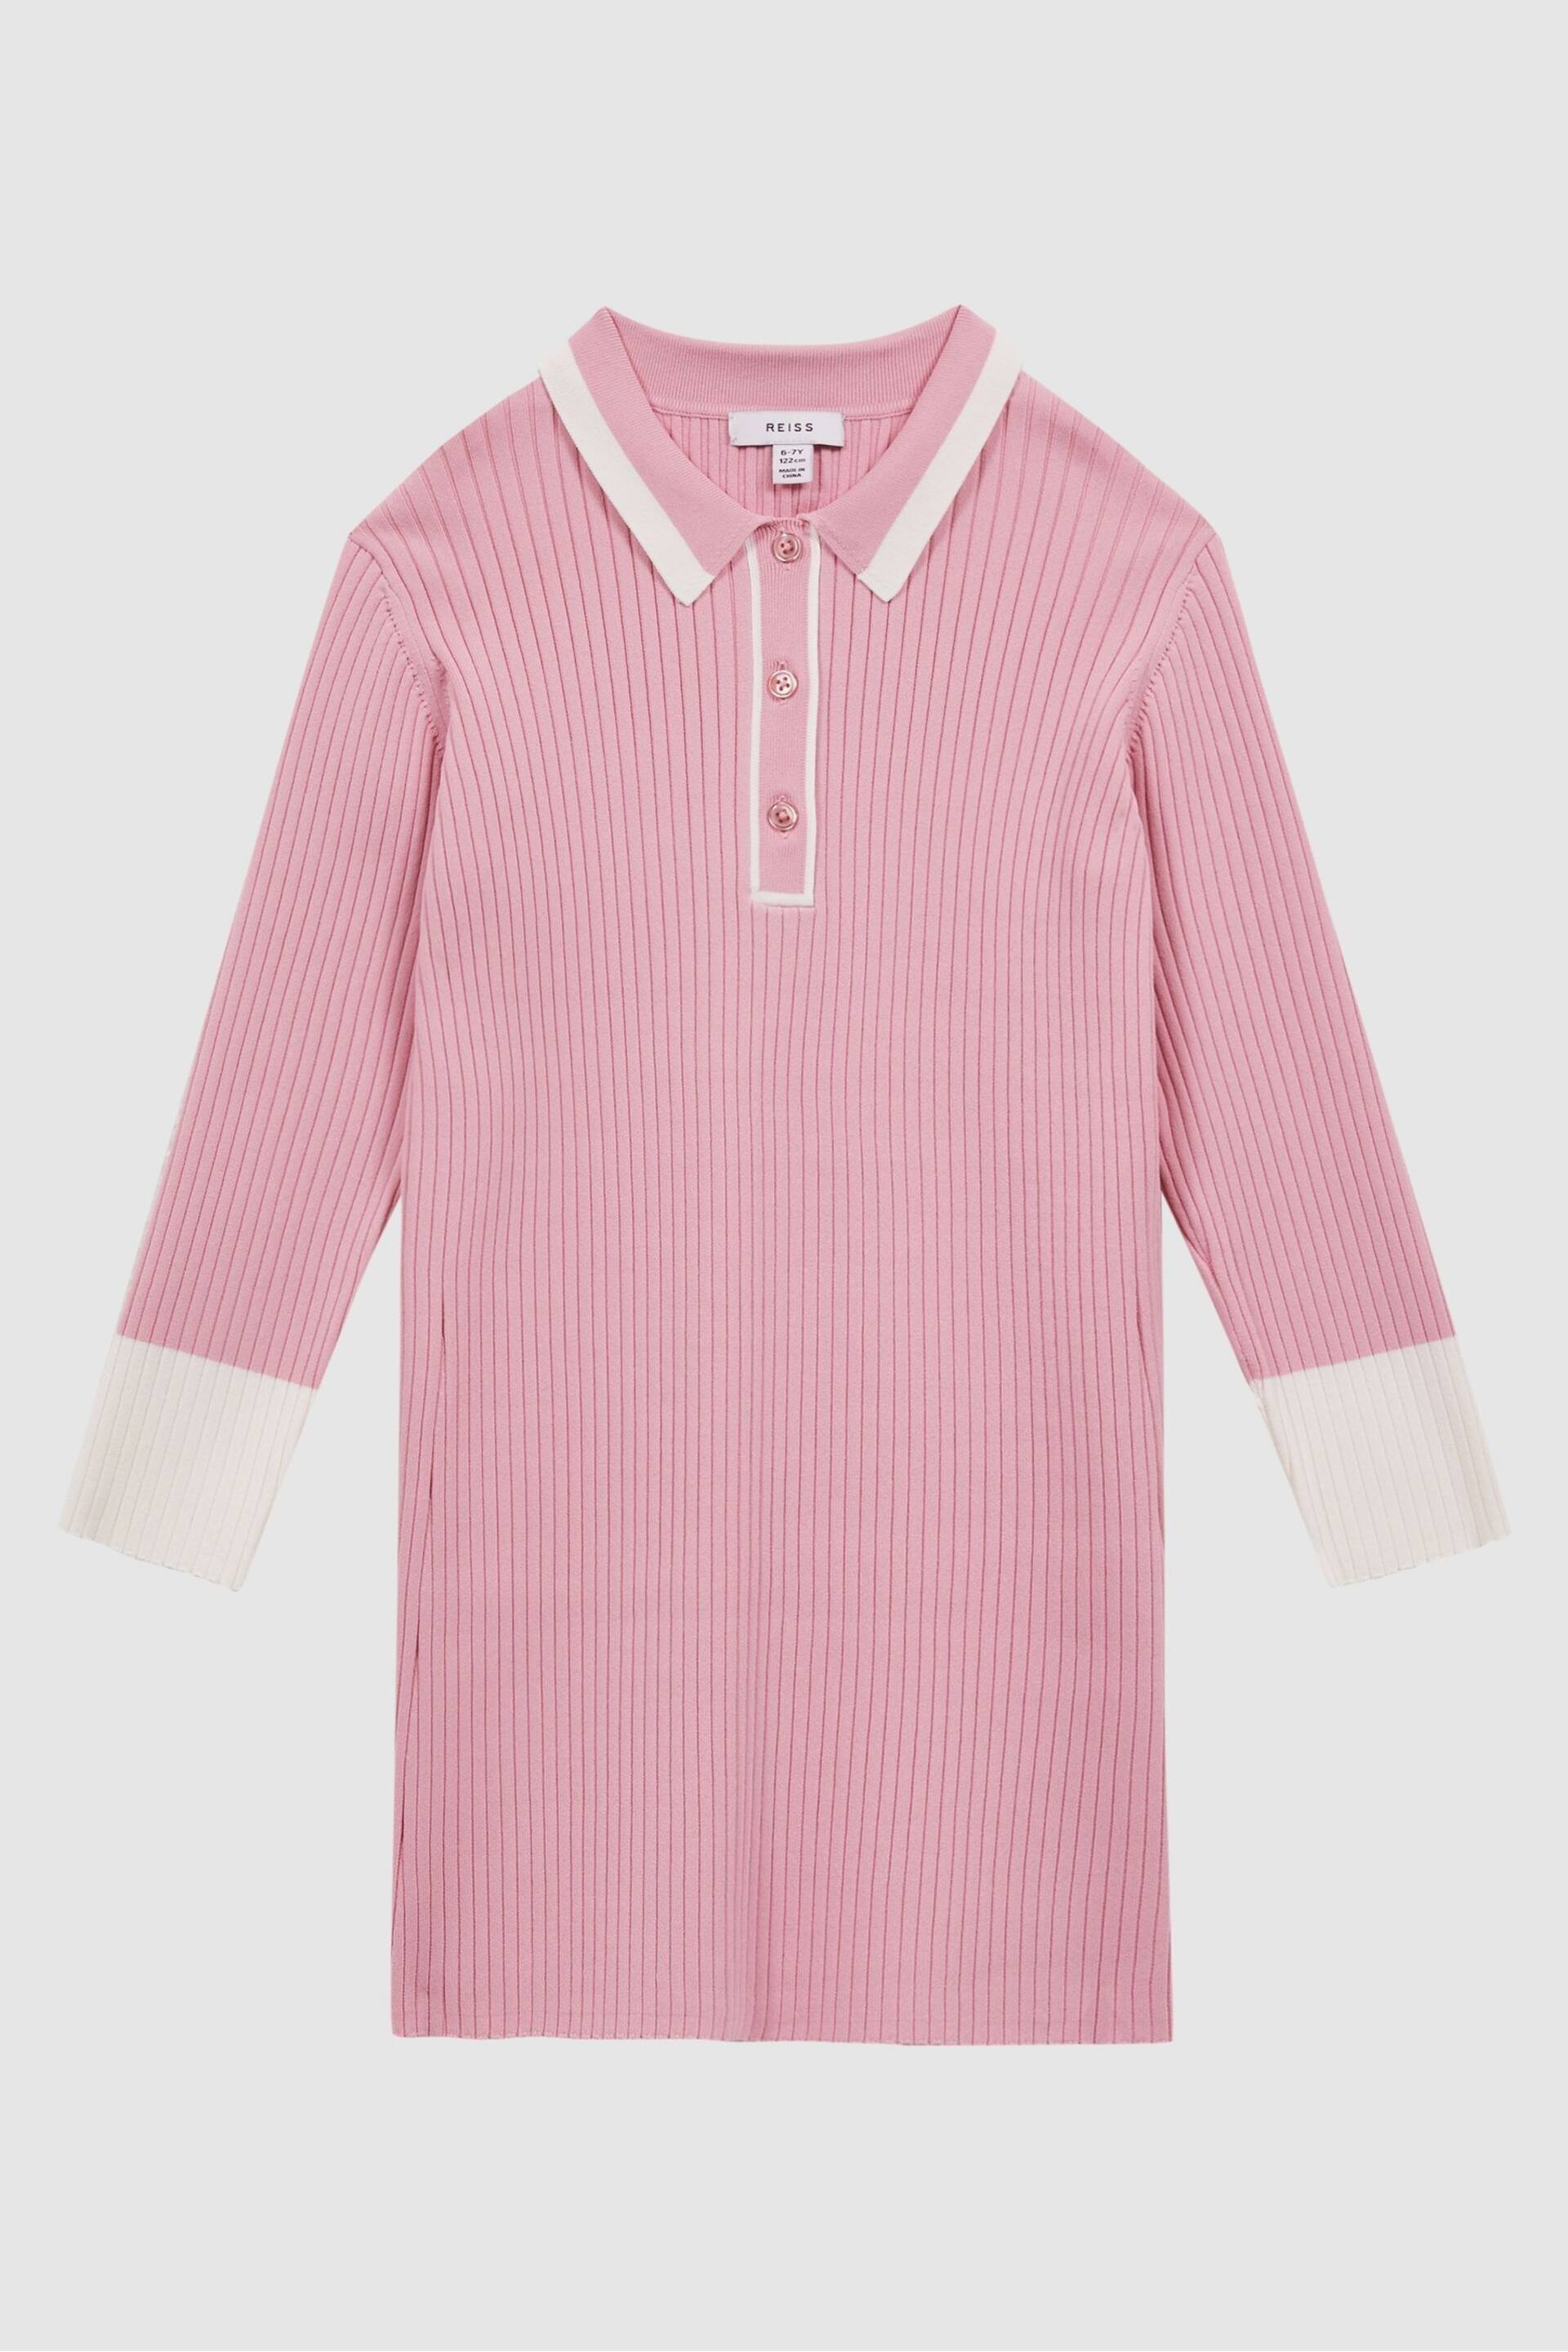 Reiss Pink Sammy Junior Knitted Polo Dress - Image 2 of 6